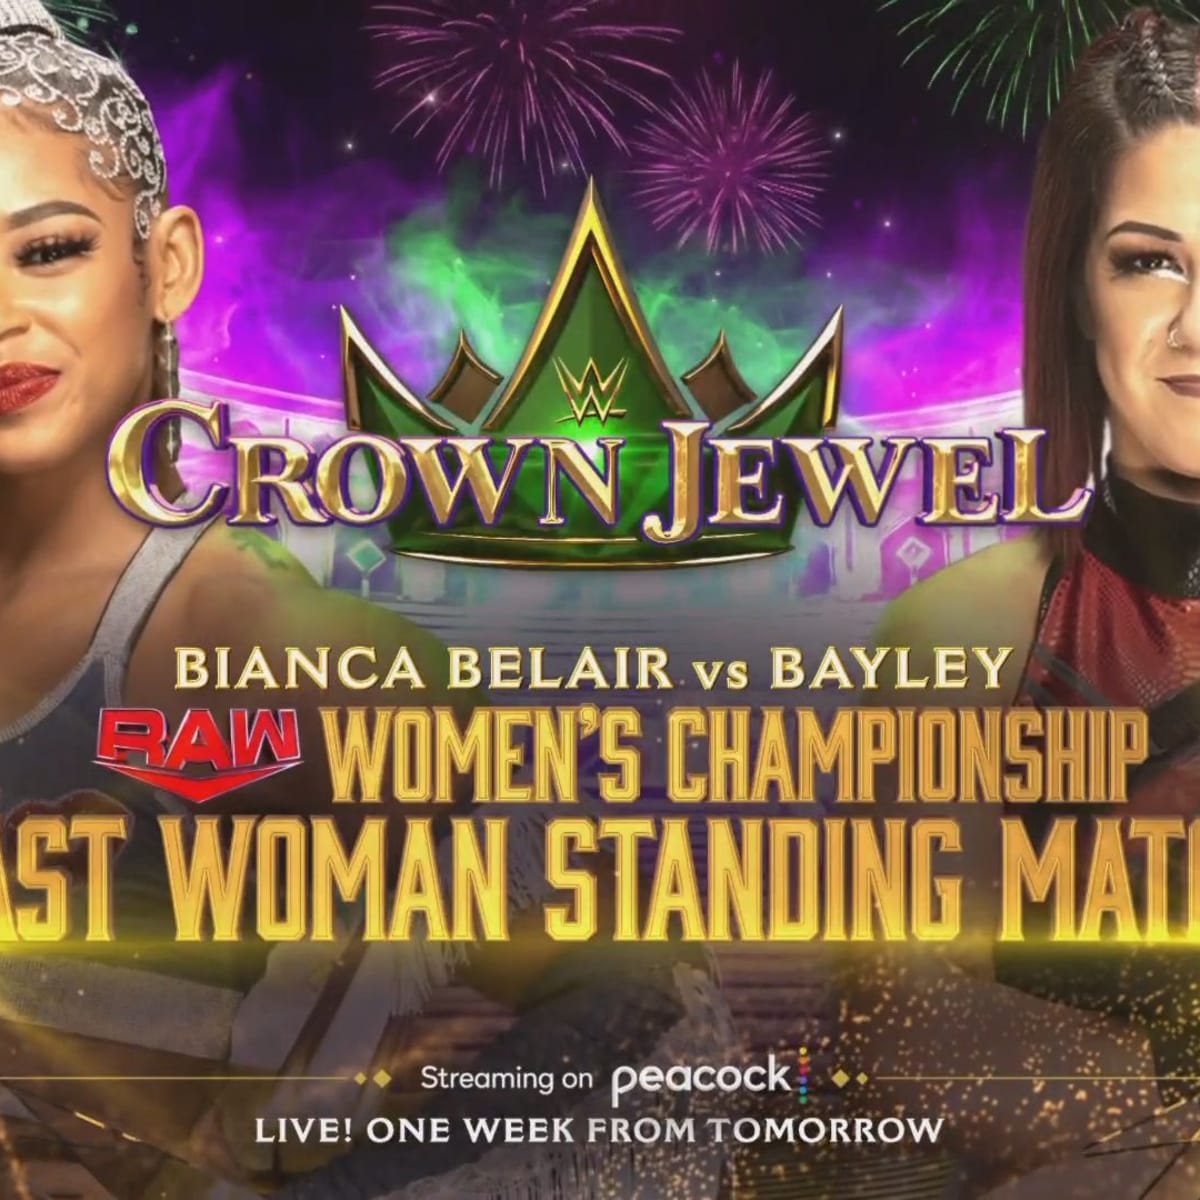 Historic Match Announced for WWE Crown Jewel